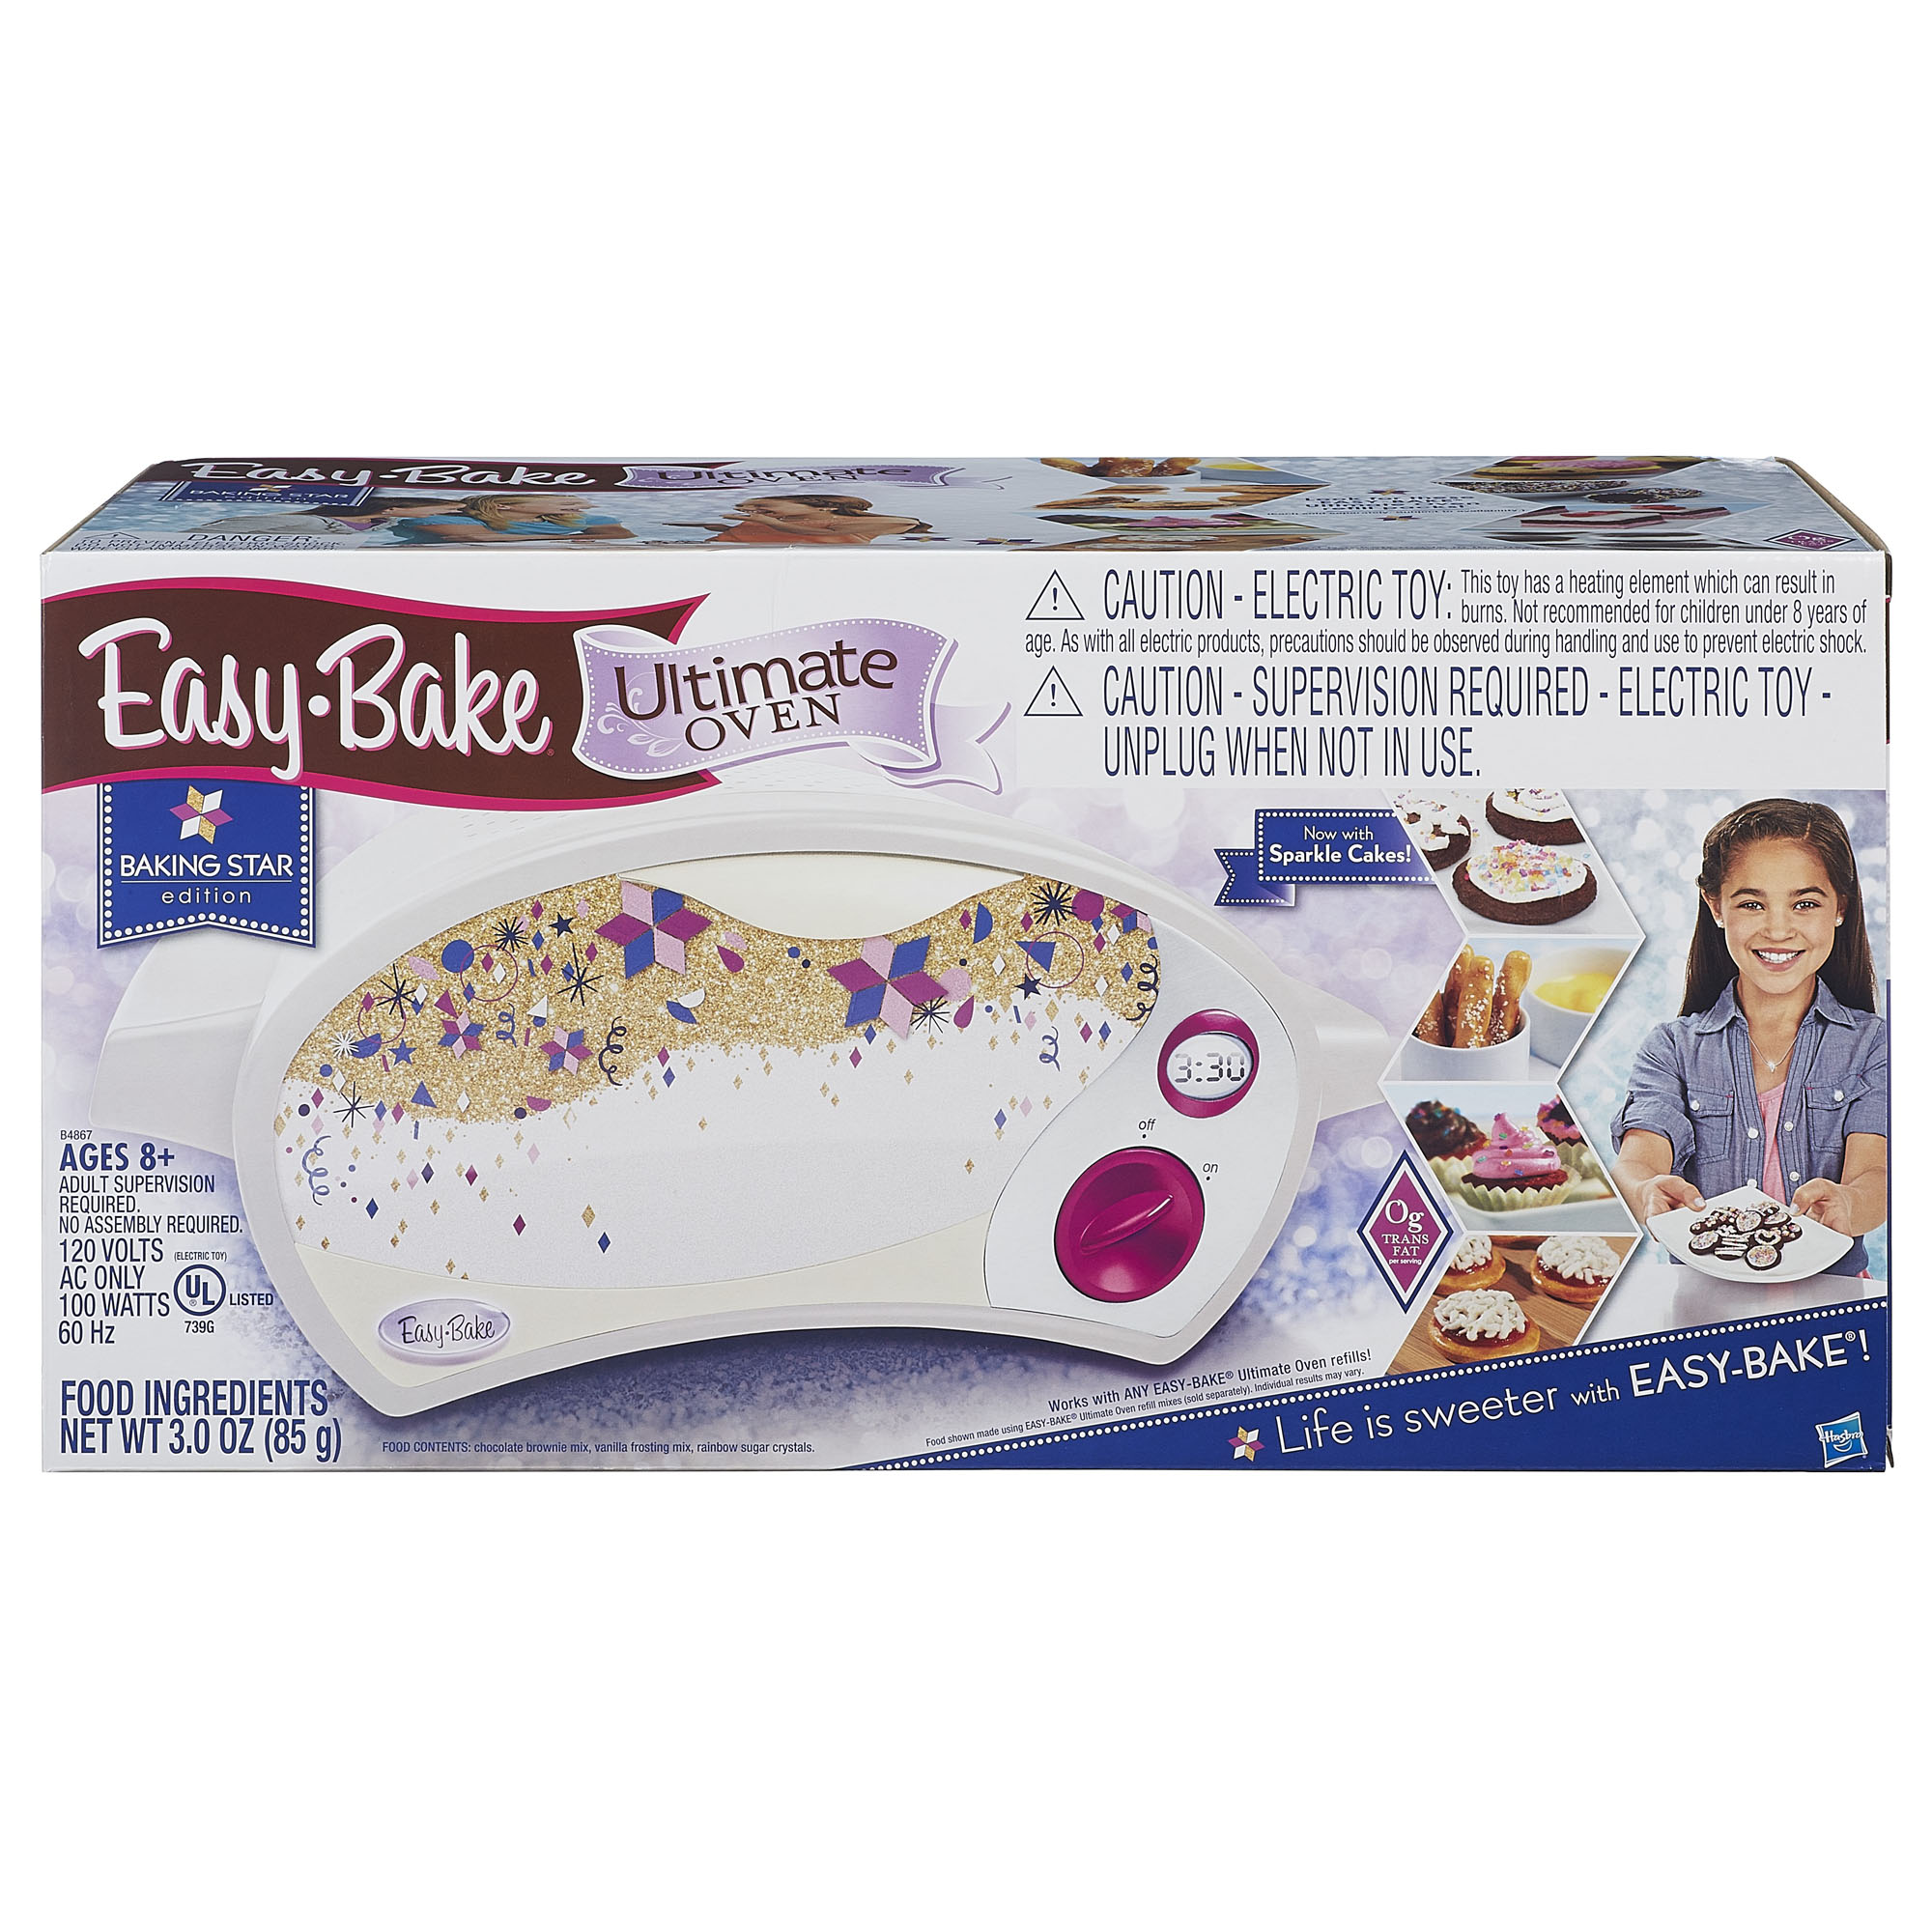 Easy-Bake Ultimate Oven Baking Star Edition - Pink and Blue Magazine